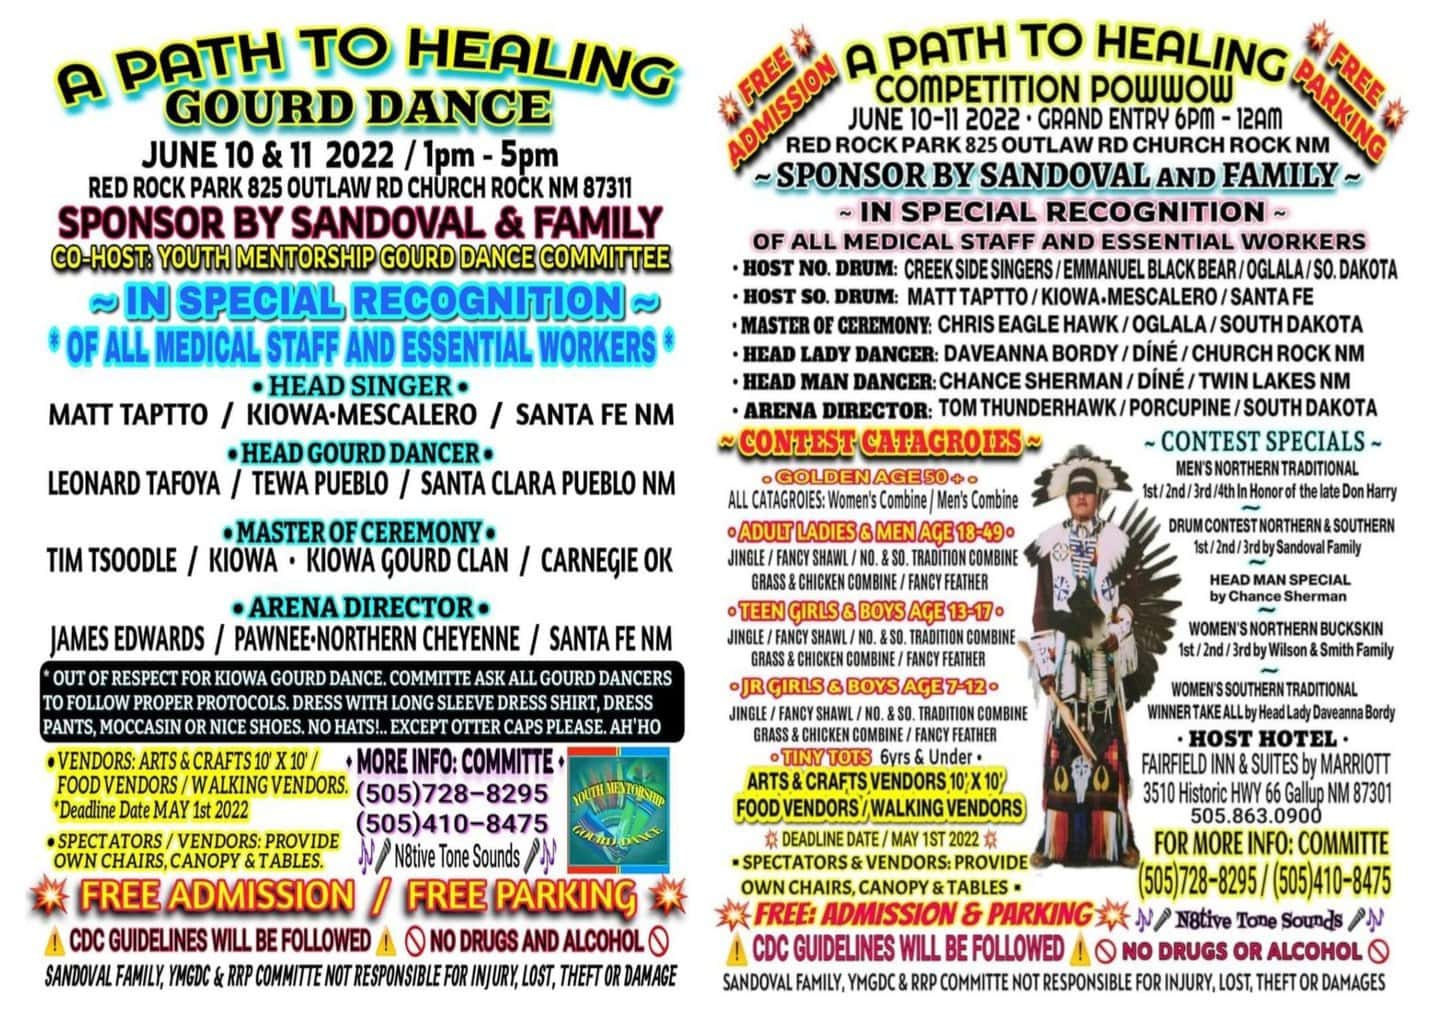 A Path to Healing Gourd Dance and Competition Pow Wow 2022